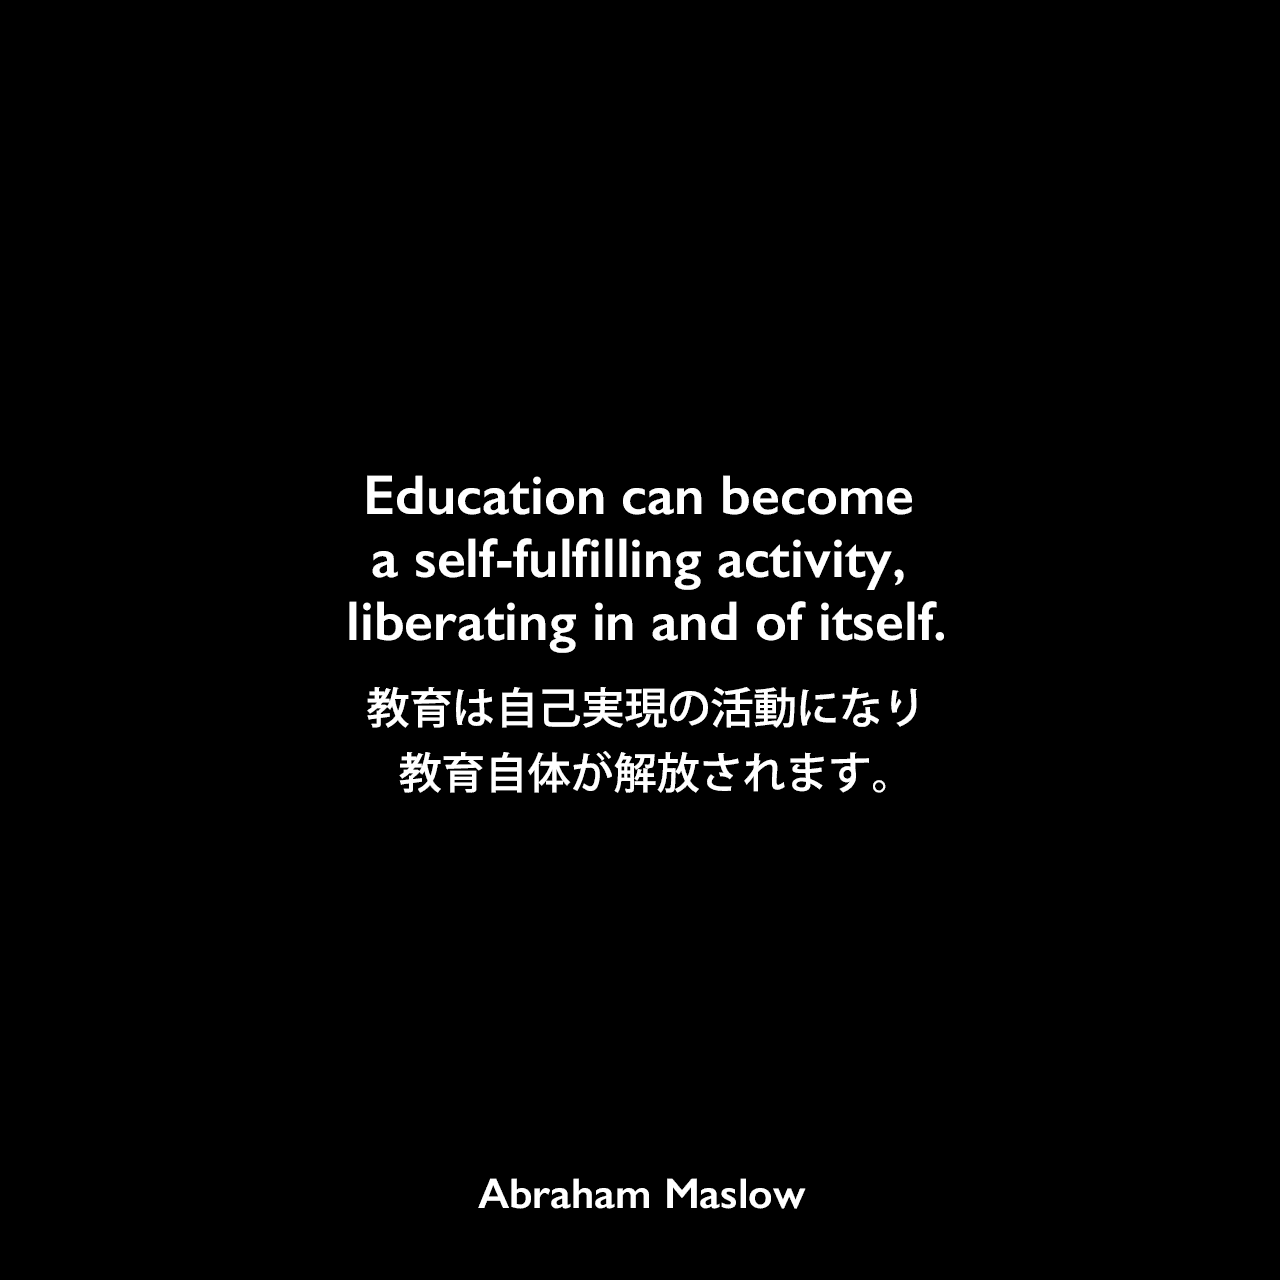 Education can become a self-fulfilling activity, liberating in and of itself.教育は自己実現の活動になり、教育自体が解放されます。Abraham Maslow